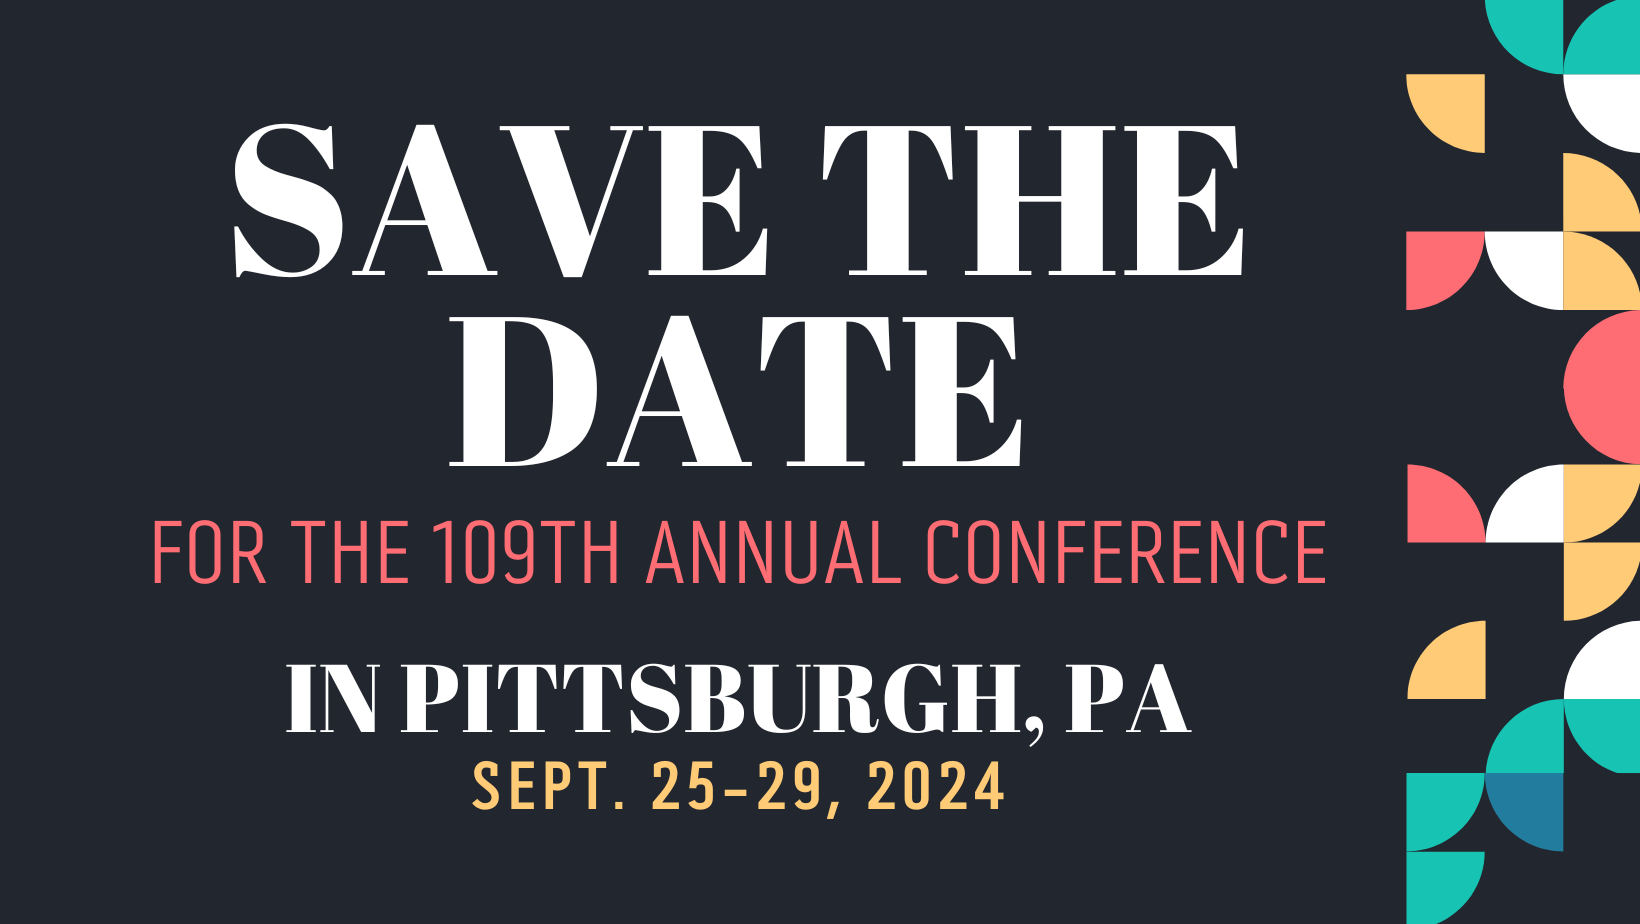 Save the Date for the 109th Annual Conference in Pittsburgh, PA. Sept. 25-29, 2024